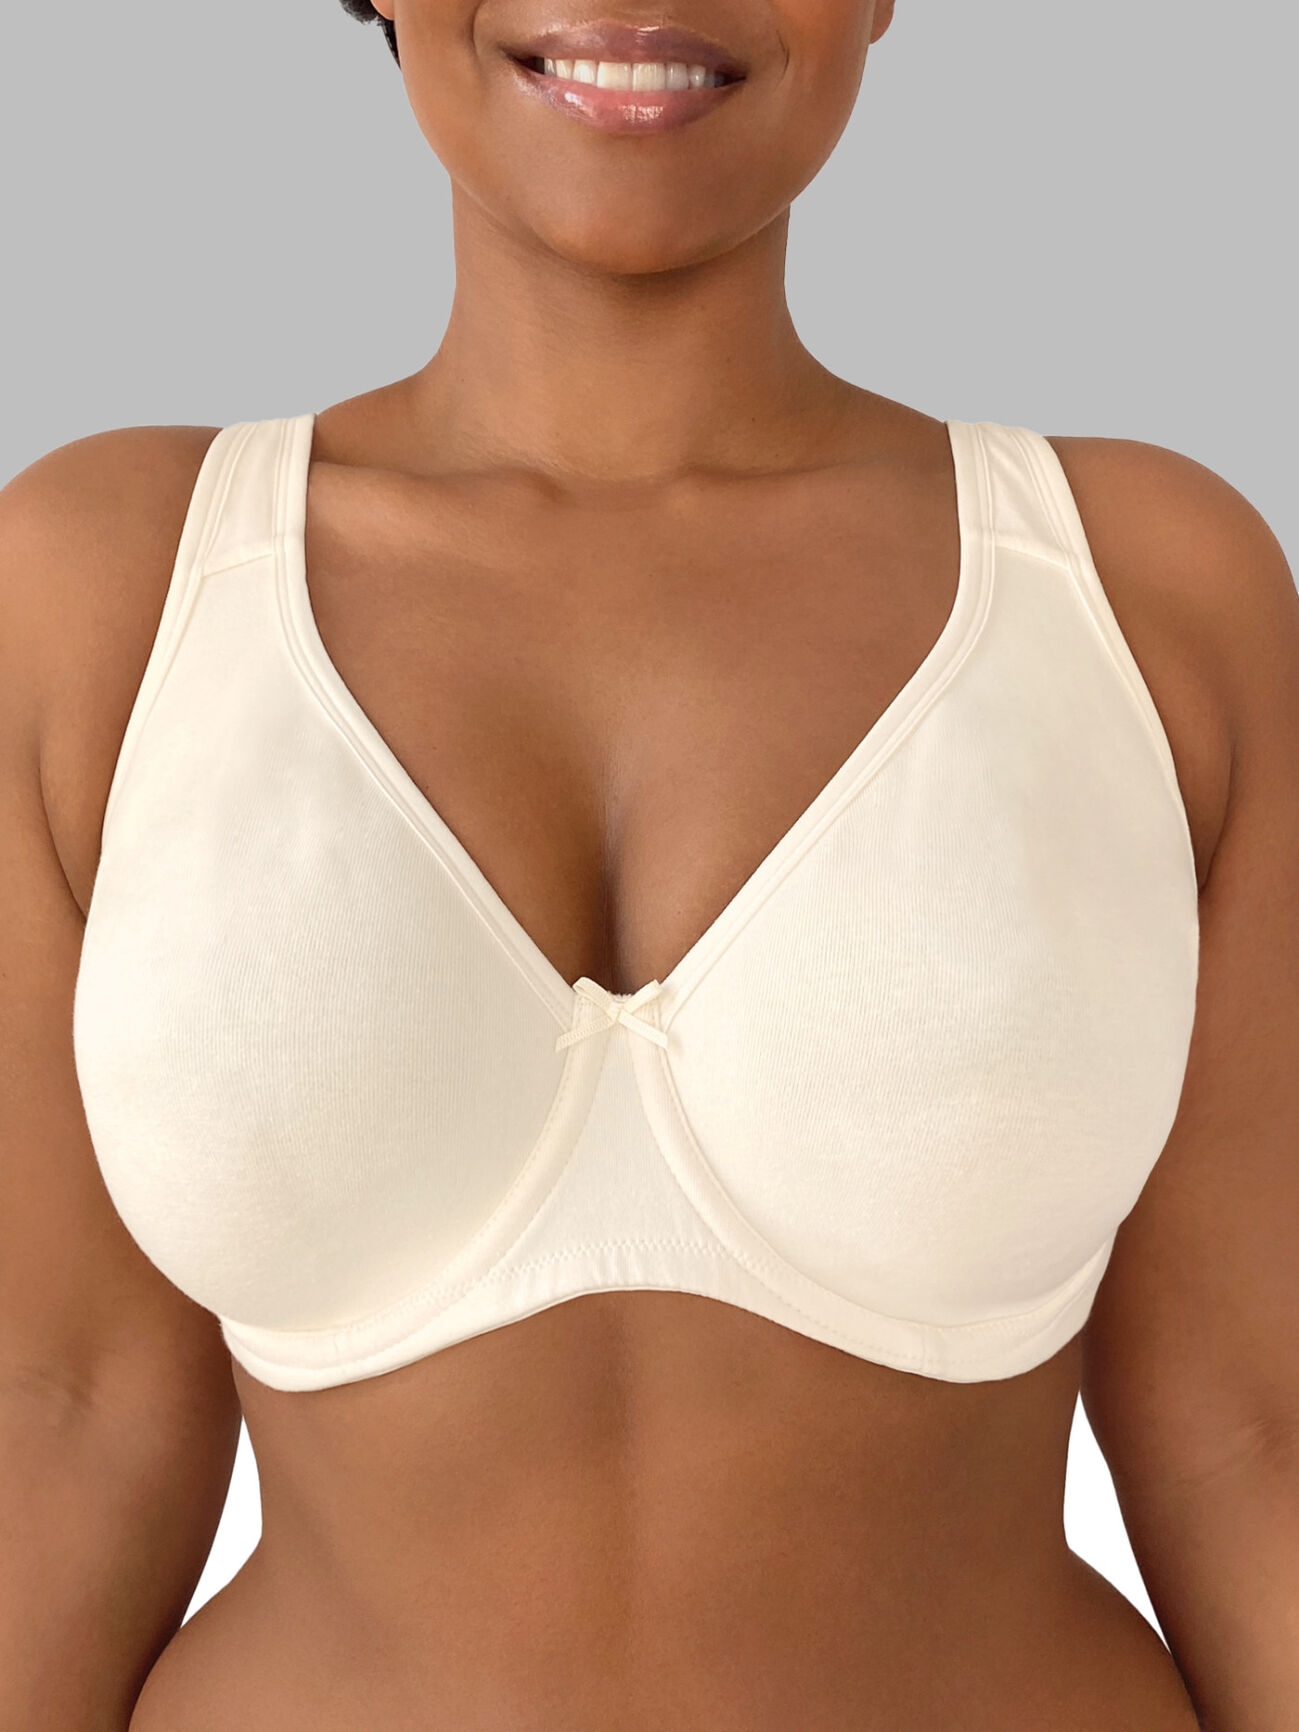 Unlined Seamless Bras 34A, Bras for Large Breasts